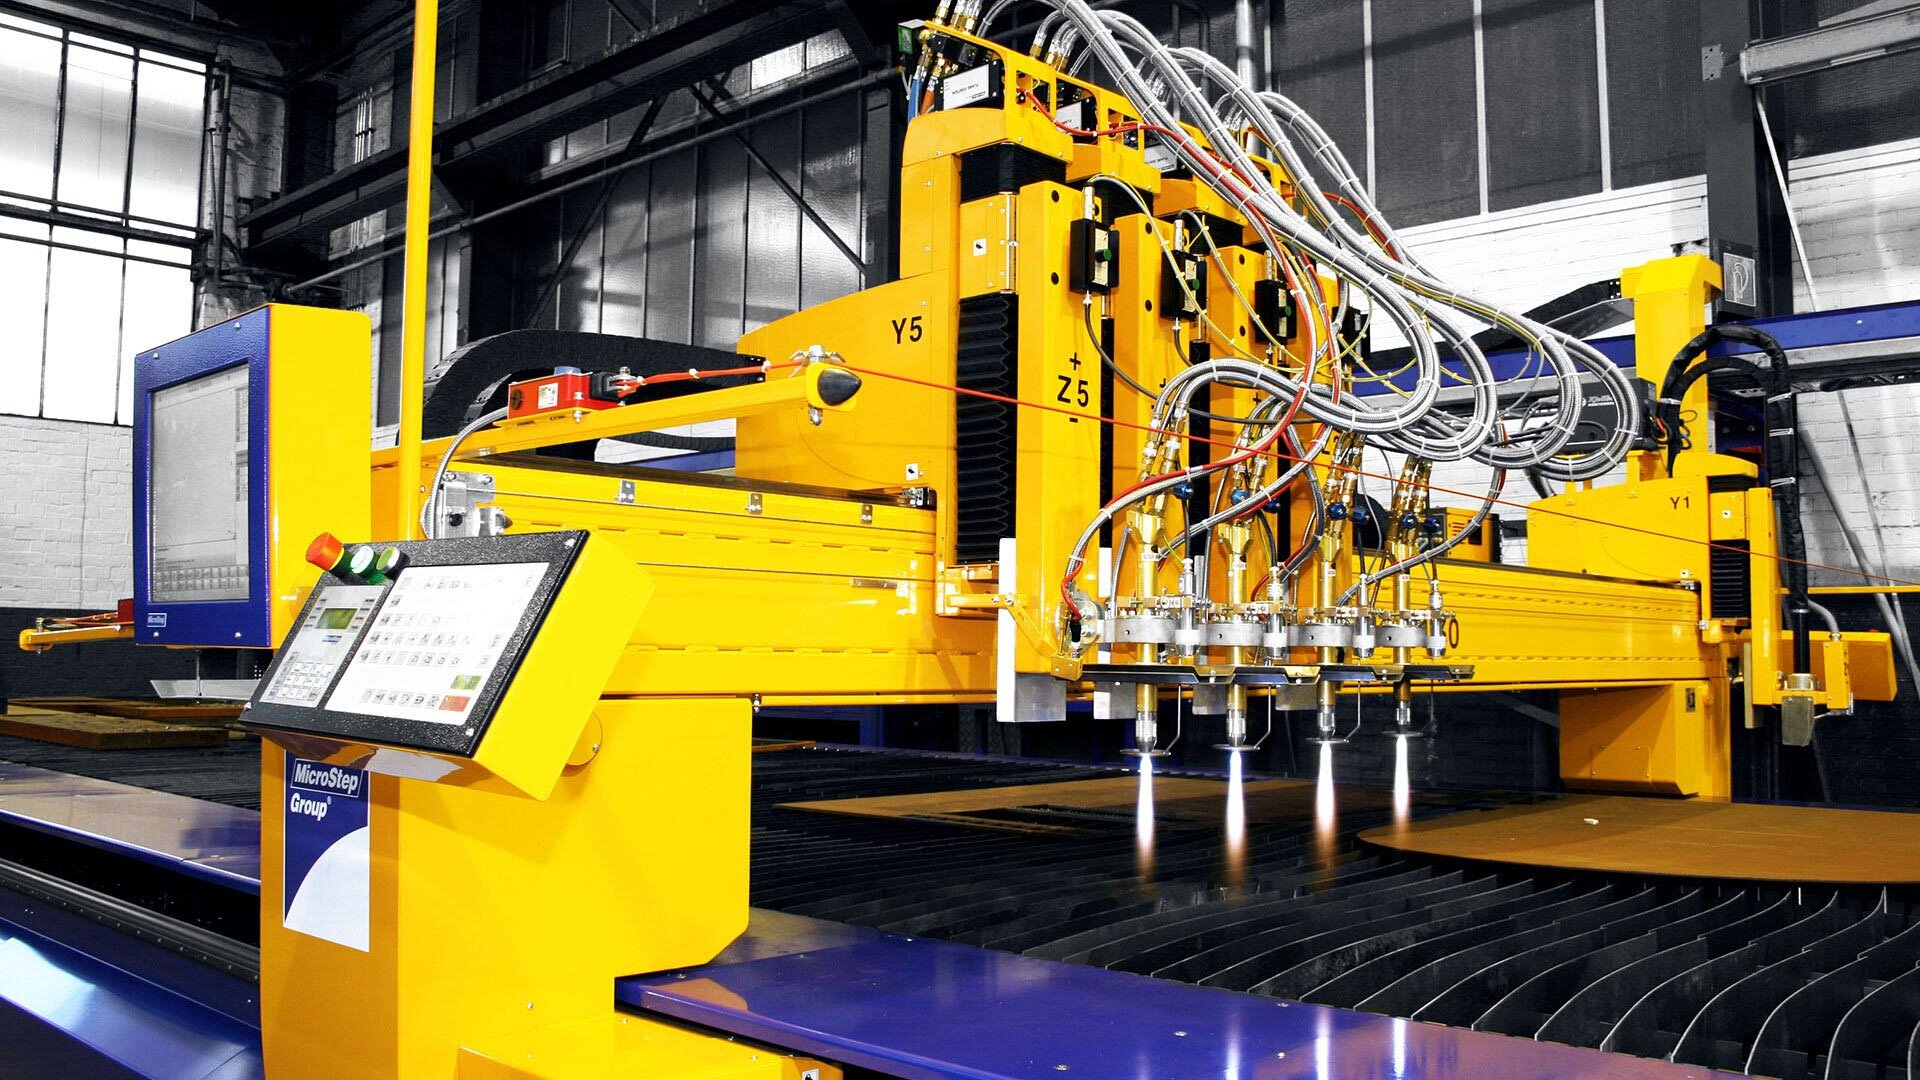 The CombiCut oxyfuel cutting machine is ideally suited for multi-shift operation